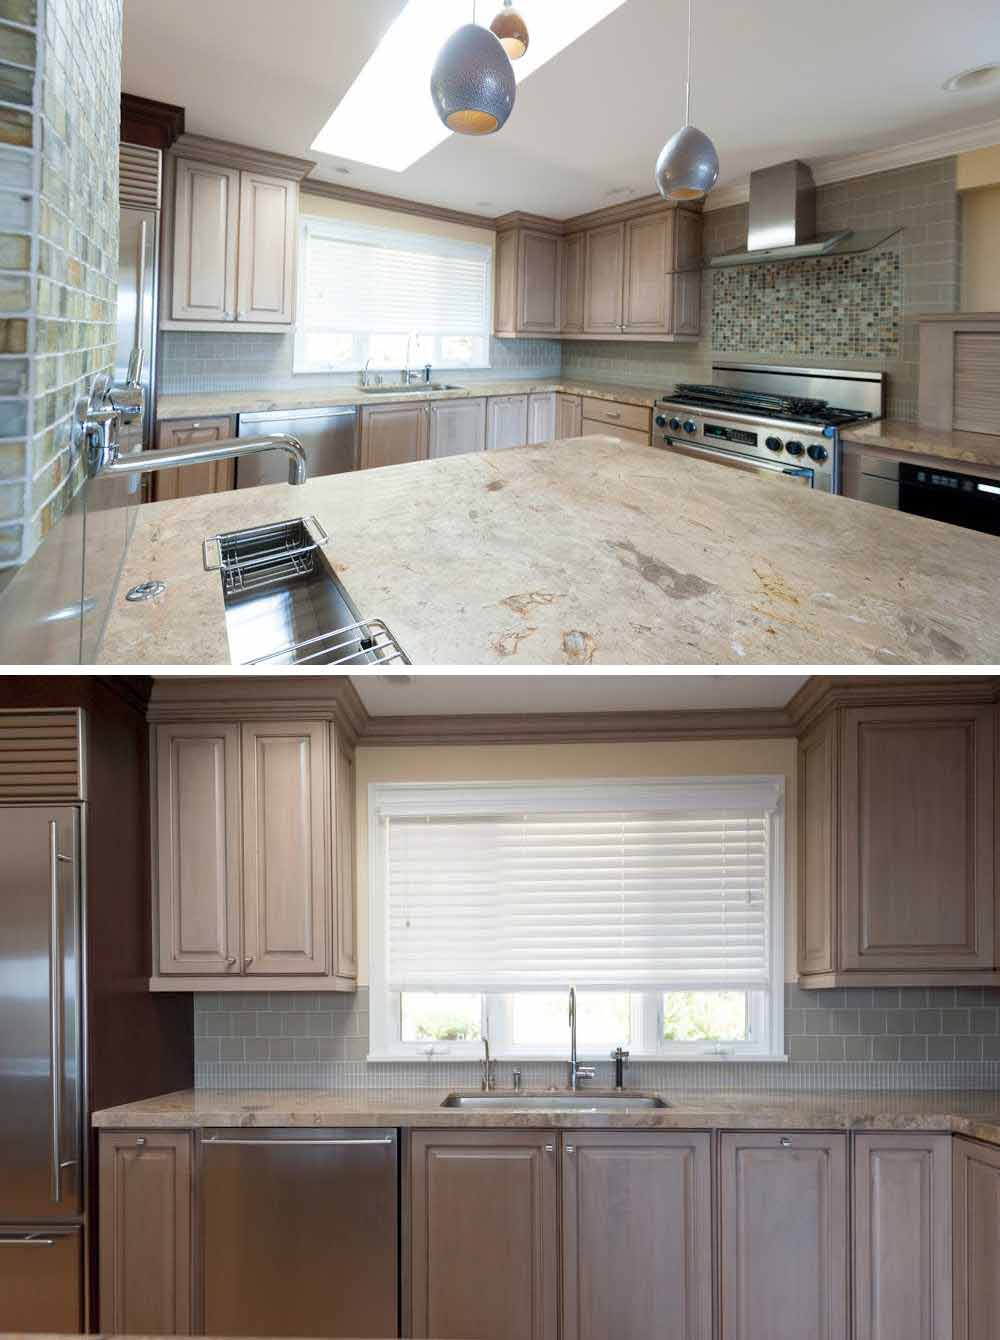 BEFORE - The original kitchen had wood cabinets and multiple different tile designs.